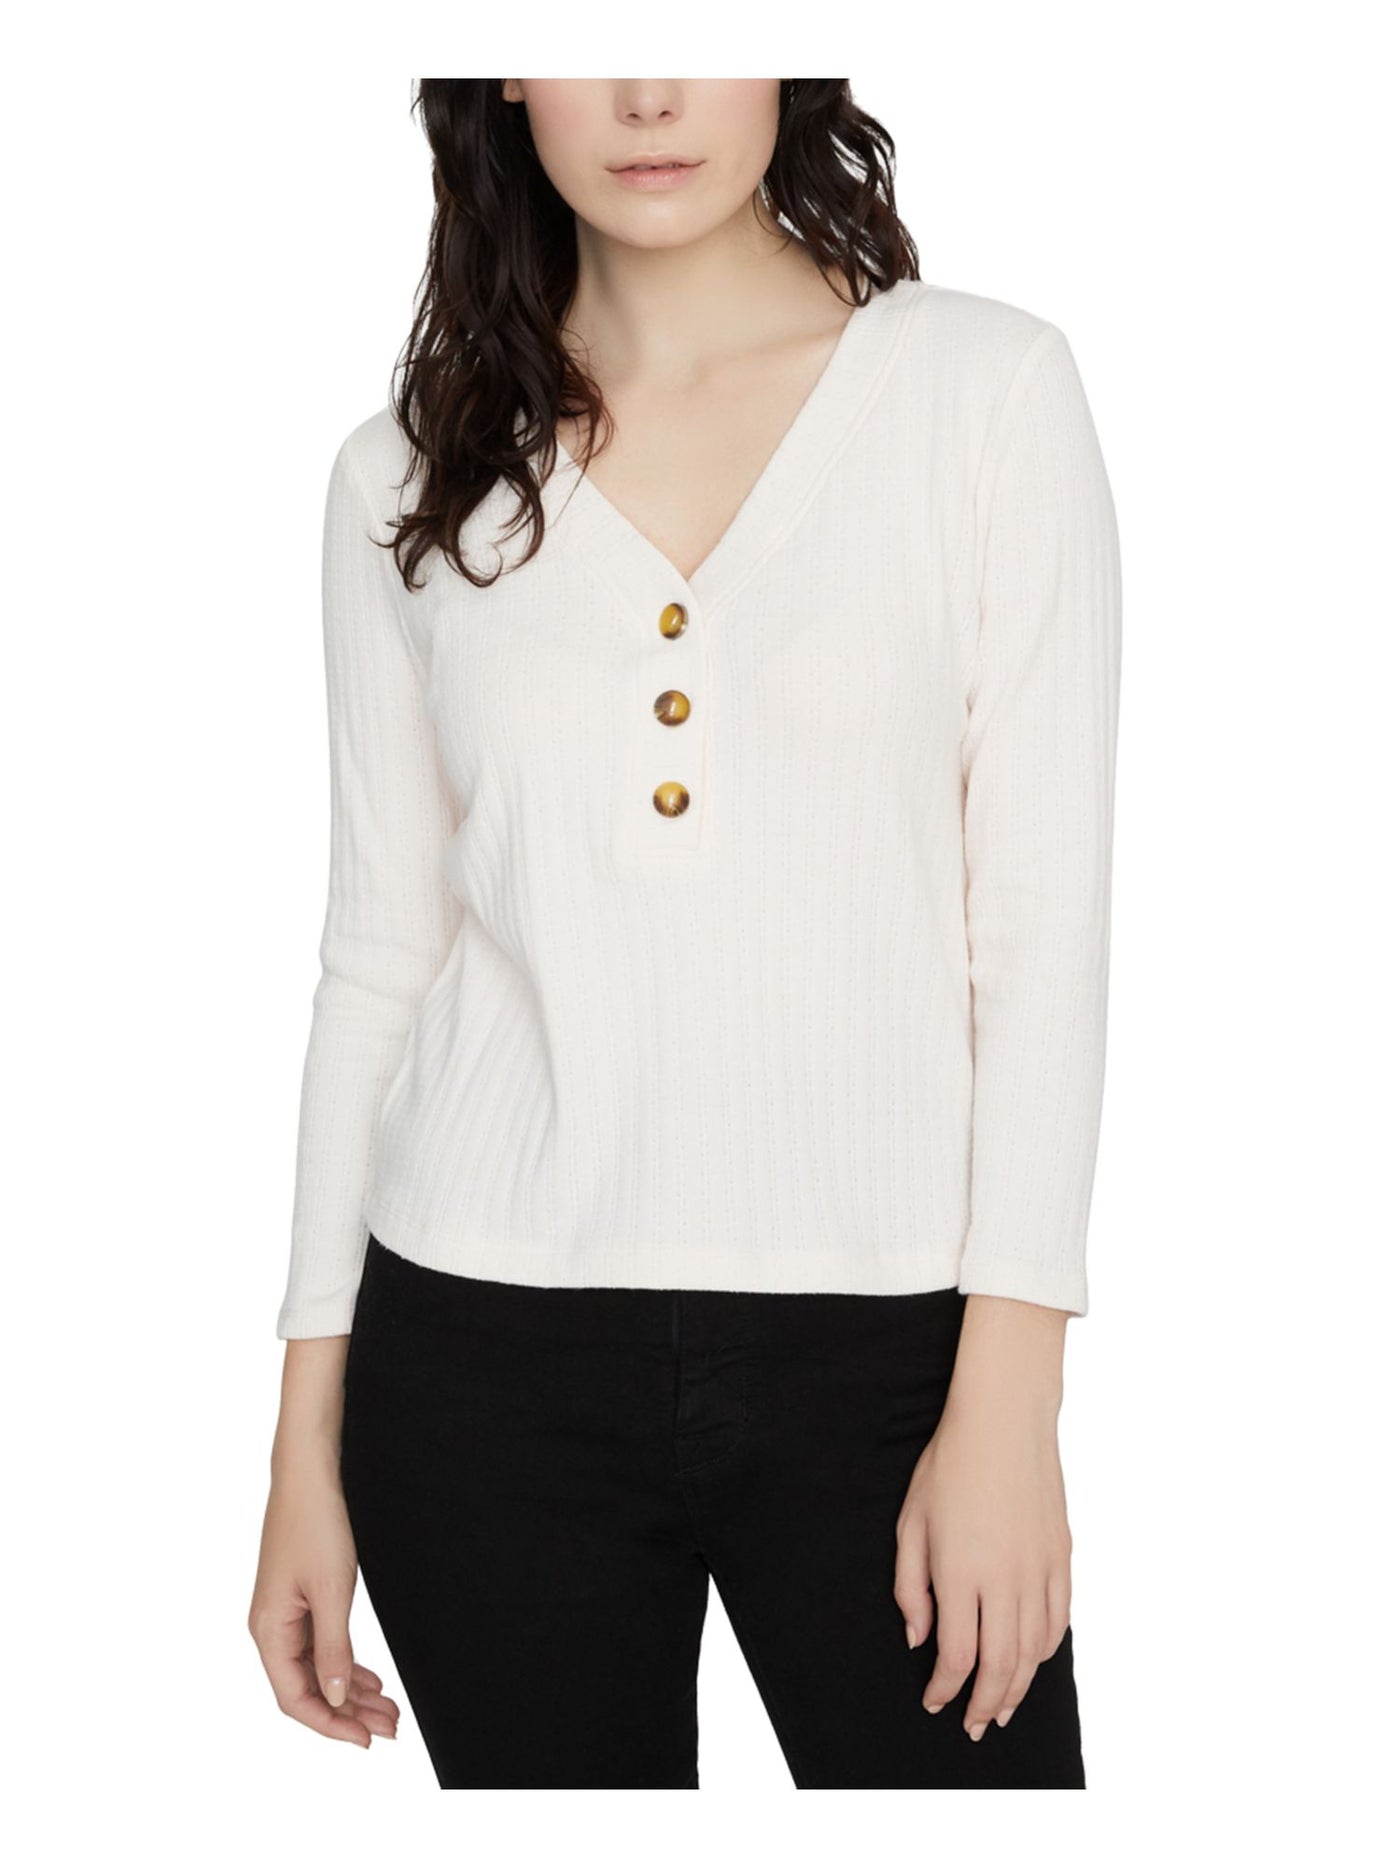 SANCTUARY Womens Ivory Pinstripe 3/4 Sleeve With Buttons Sweater XS